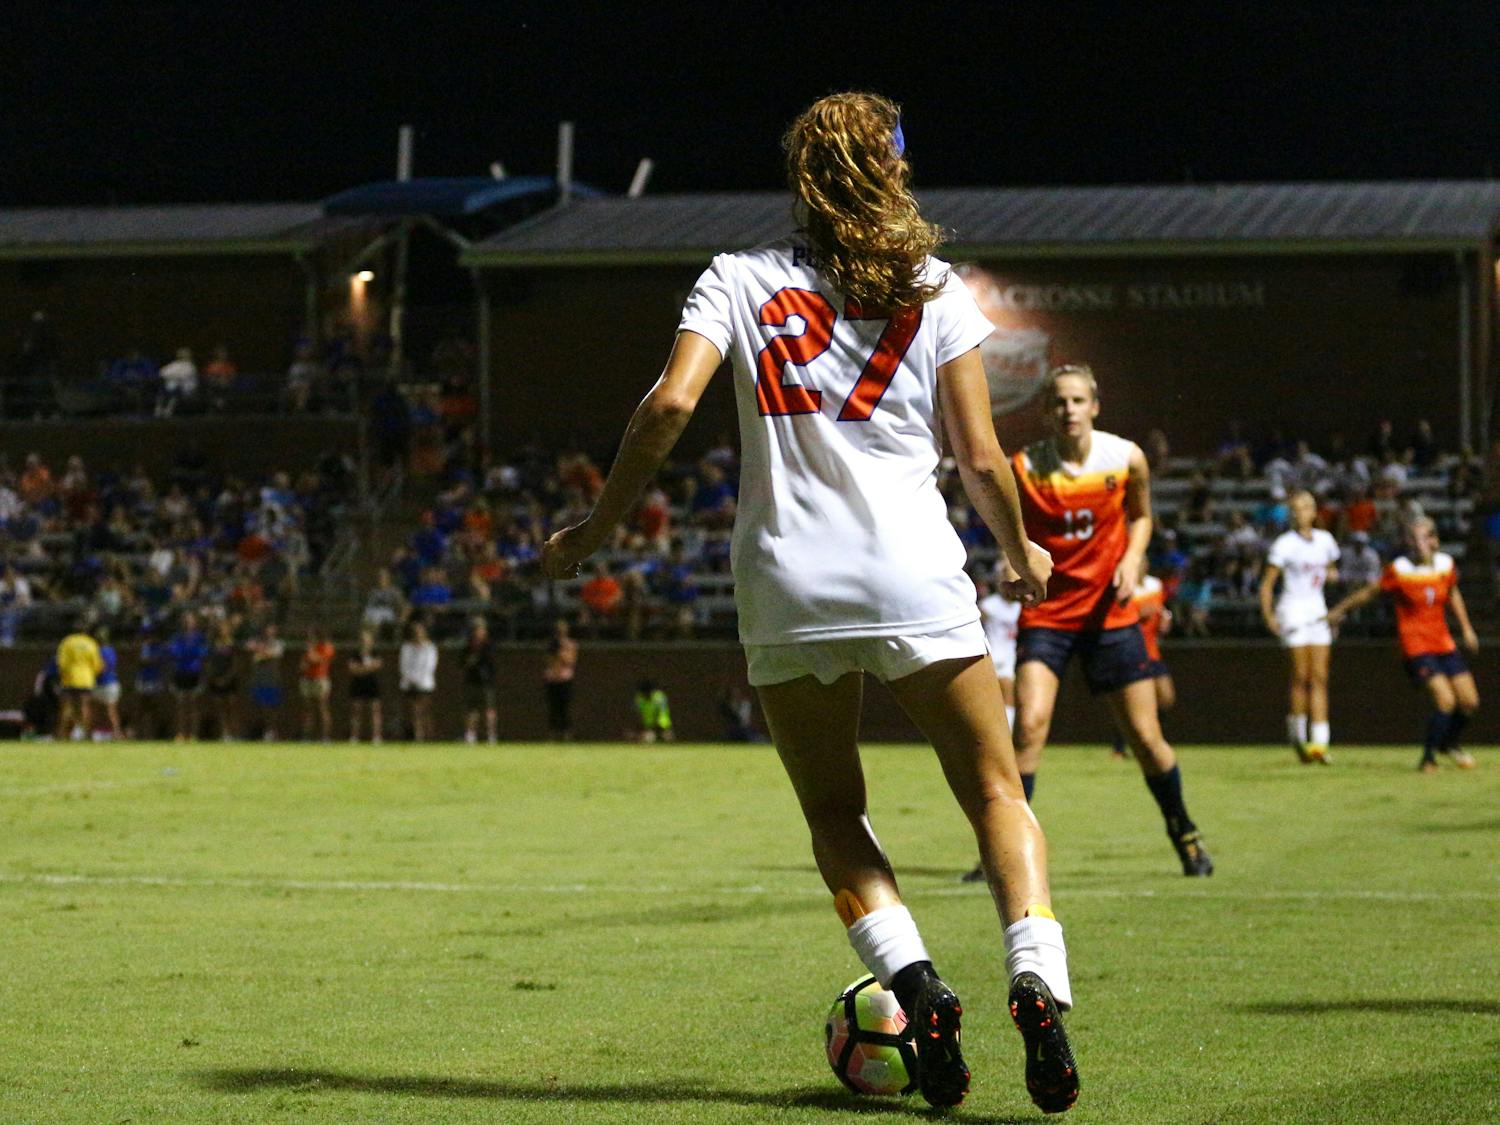 Mayra Pelayo runs with the ball during Florida's 2-1 win against Syracuse on August 27, 2017, at Donald R. Dizney Stadium. Pelayo scored the only goal of the game on Saturday against Ole Miss.